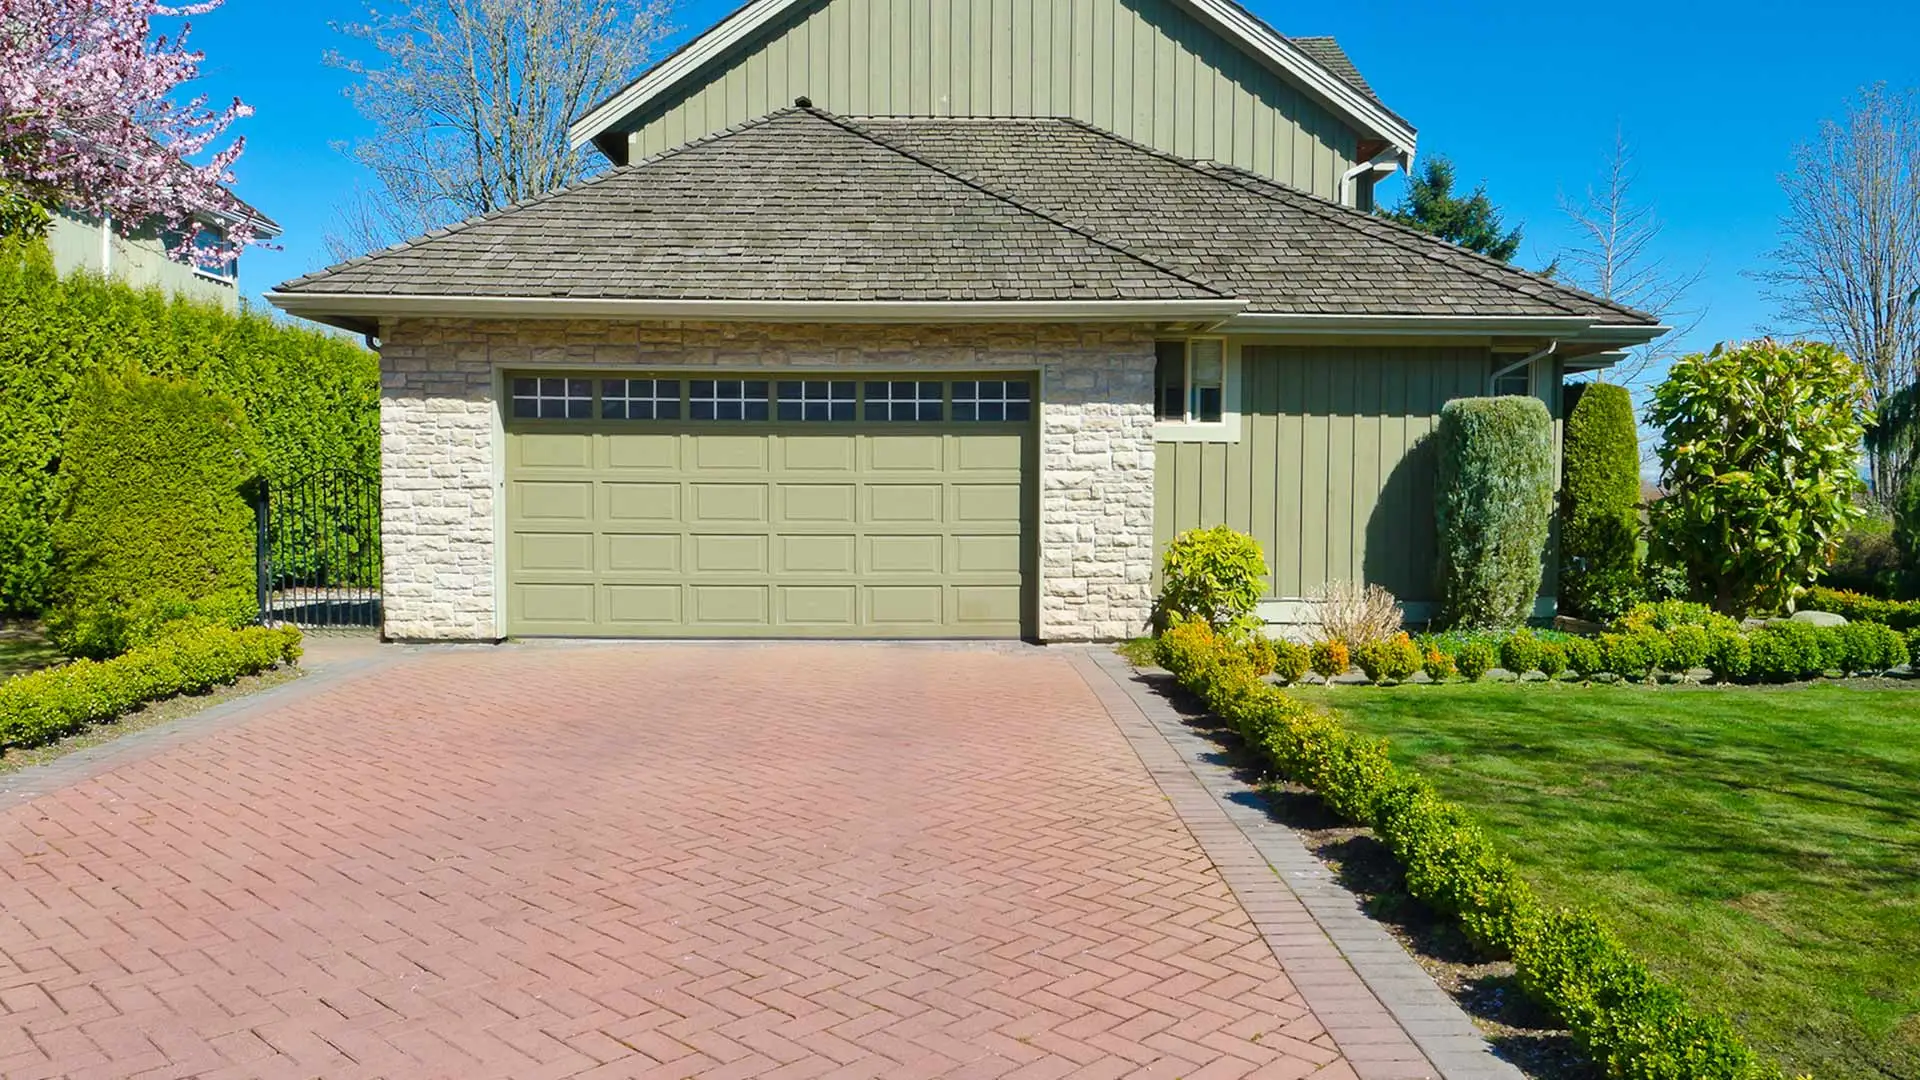 Want a New Driveway Installed on Your Property? Consider These 3 Things